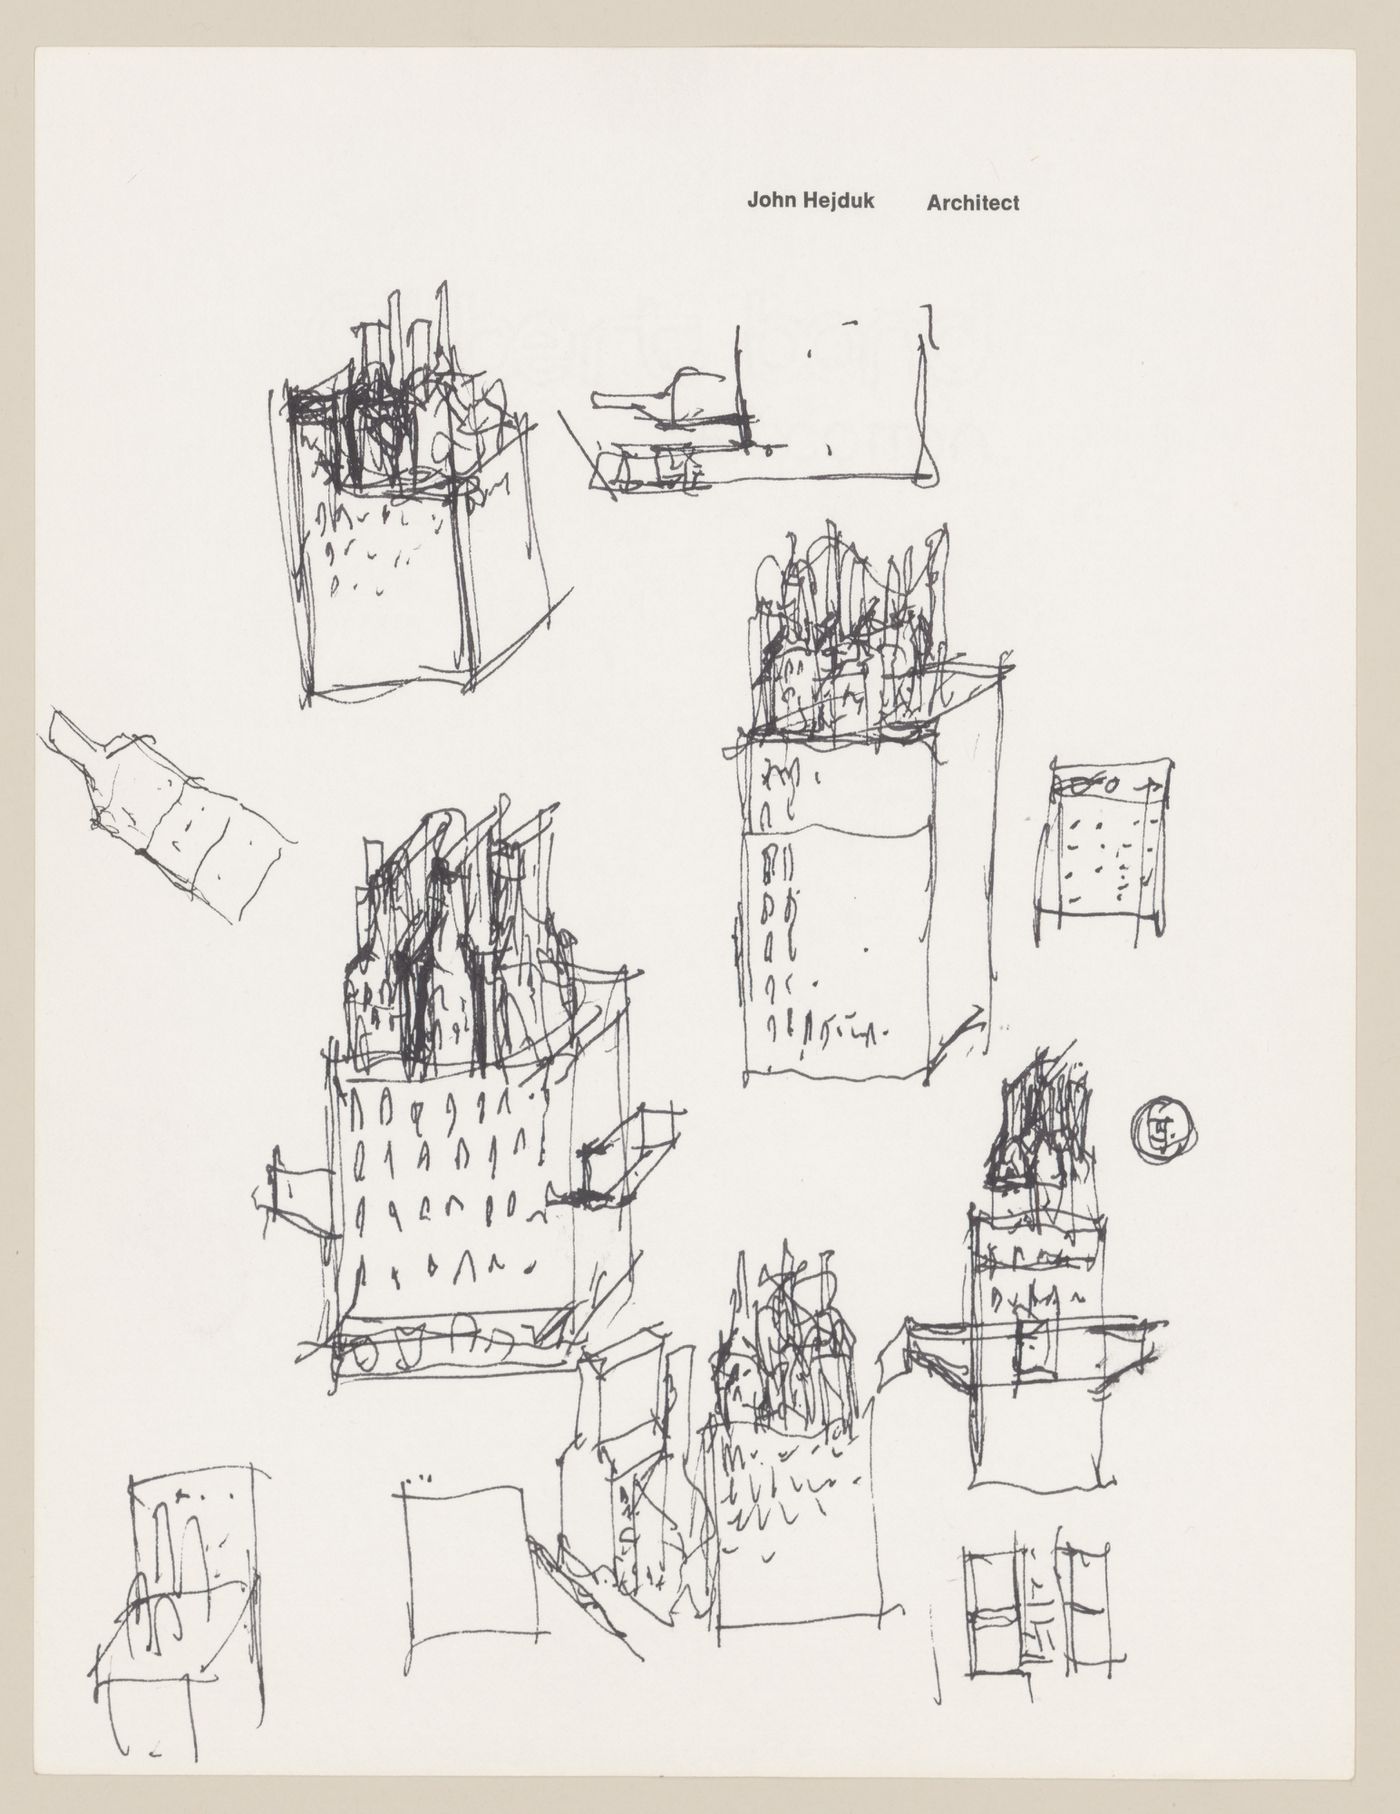 Sketch axonometrics and elevations for Cooper Union Foundation Building Renovation